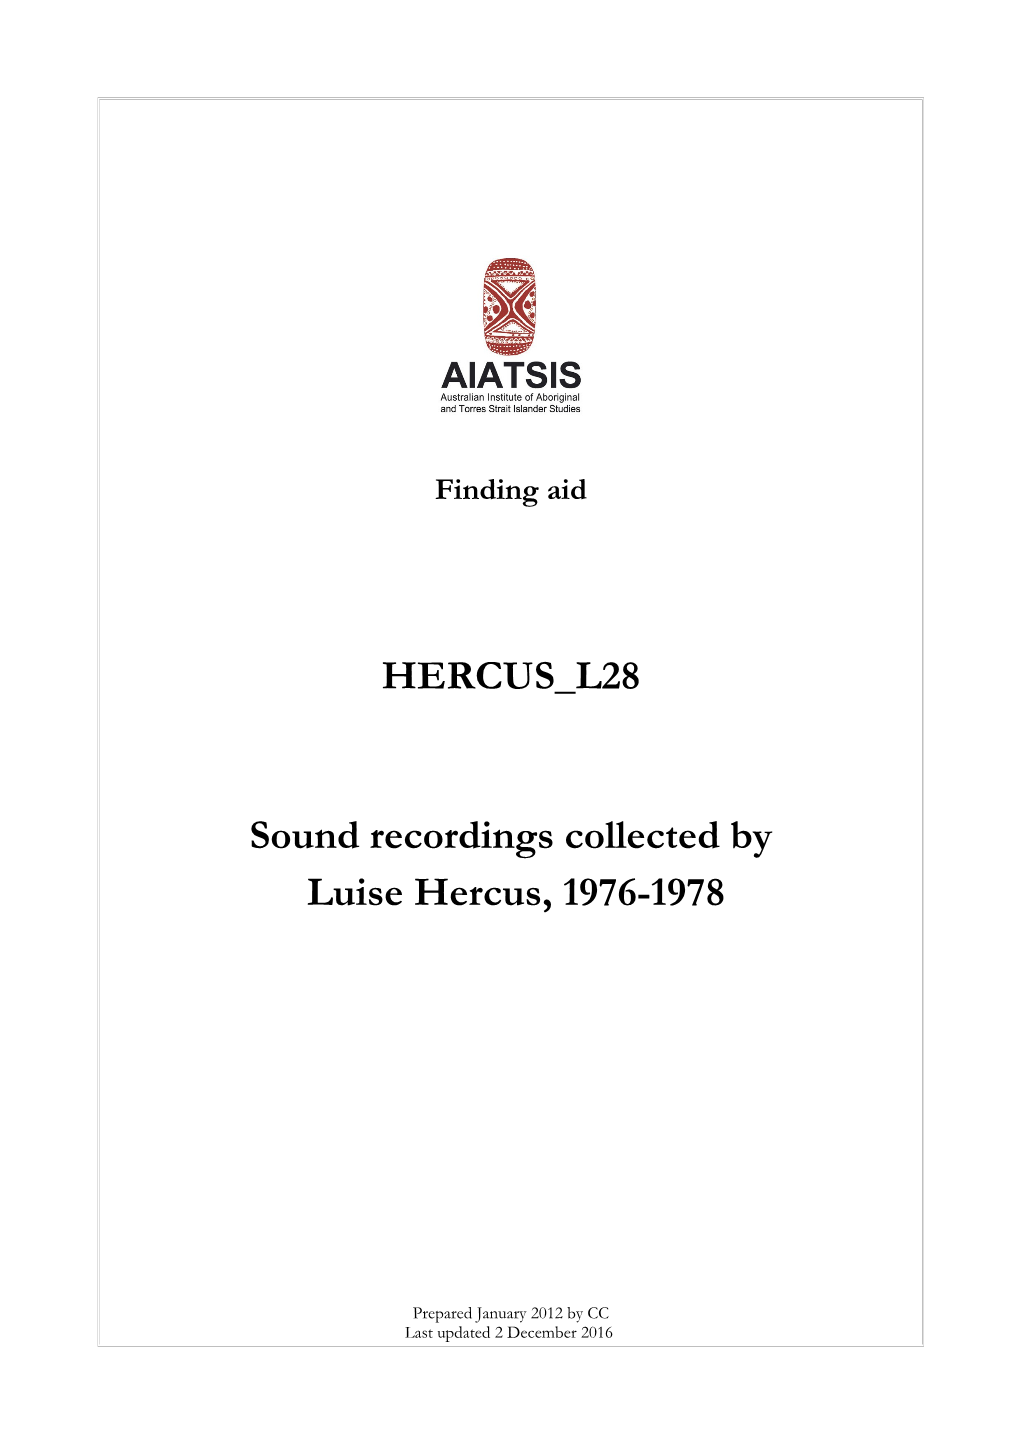 Guide to Sound Recordings Collected by Luise Hercus 1976-1978